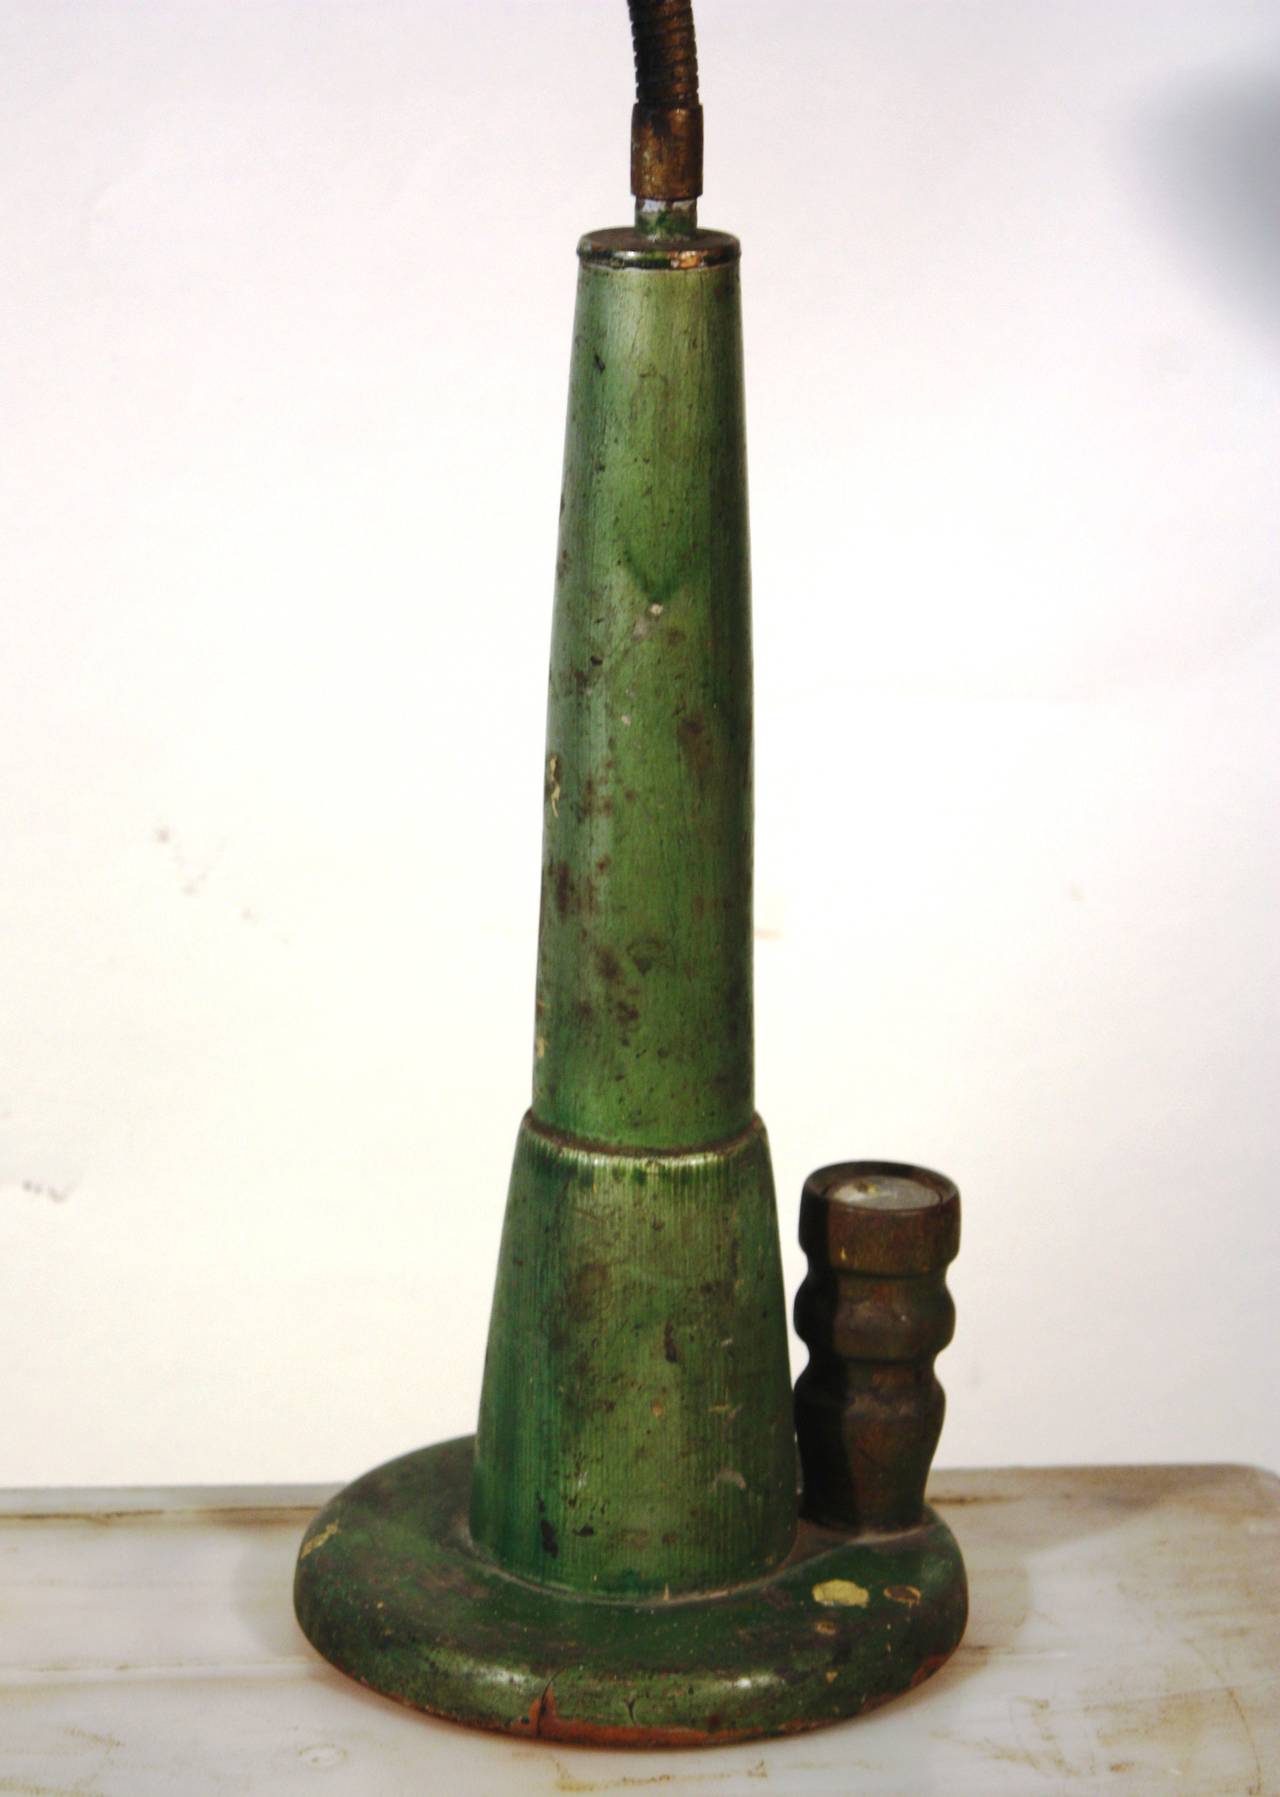 An interesting industrial table lamp circa 1930, with a turned wooden base and flexible steel neck, the base retaining its original green painted finish and tin shade.  Probably a tailor's lamp as the base has a small post which used to hold a pin